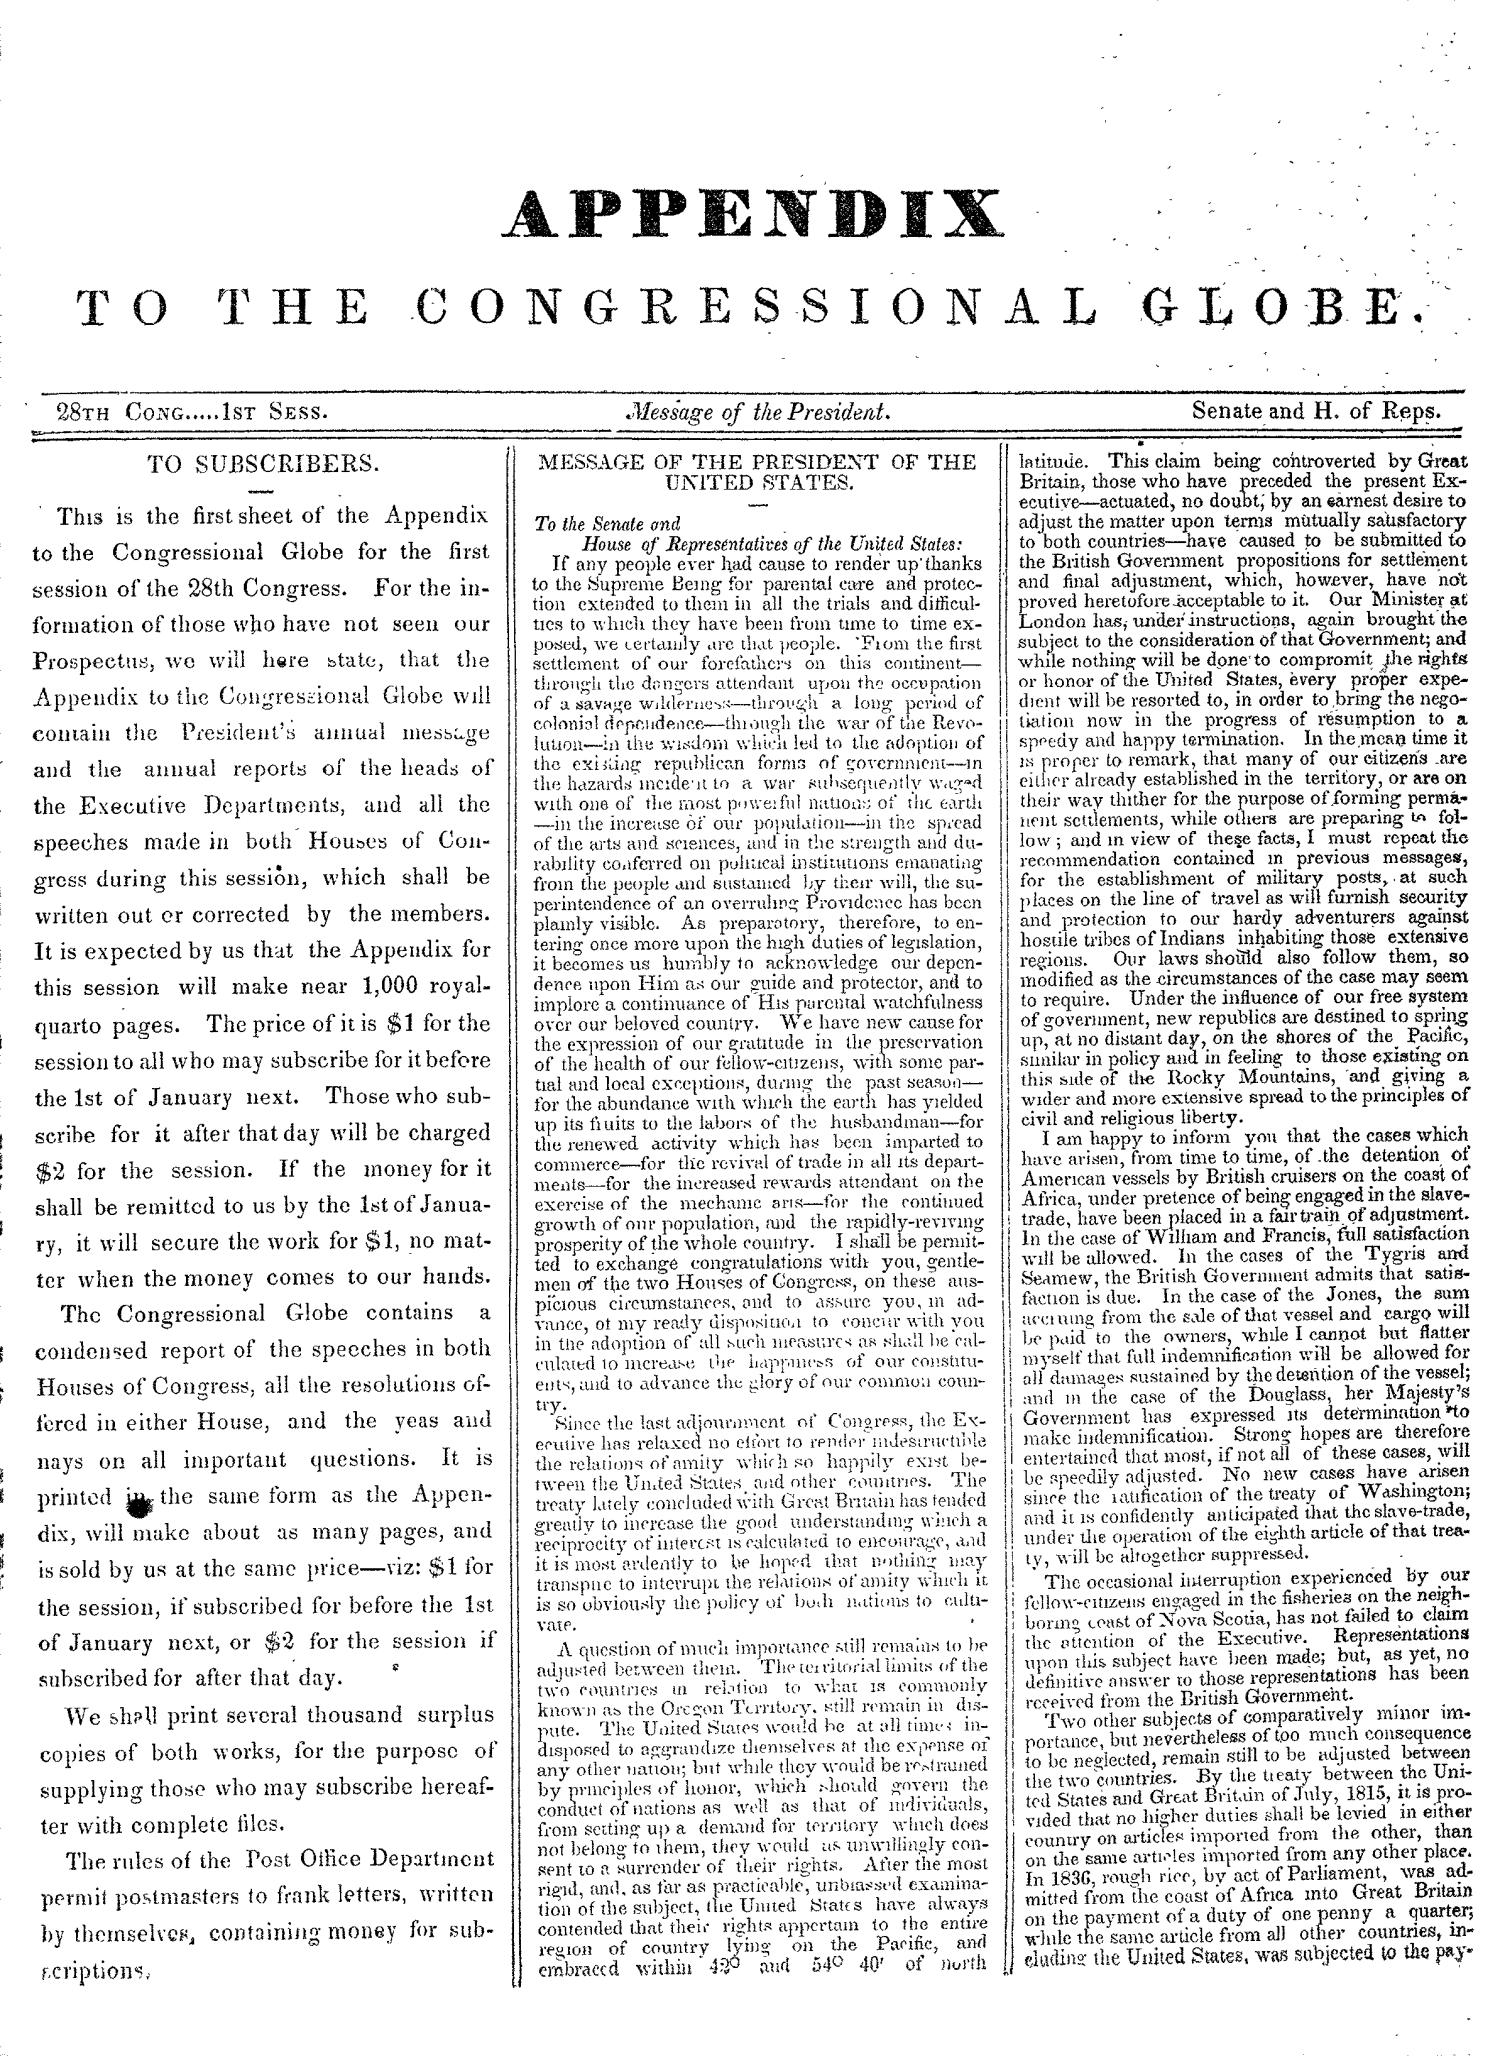 The Congressional Globe, Volume 13, Part 2: Twenty-Eighth Congress, First Session
                                                
                                                    None
                                                